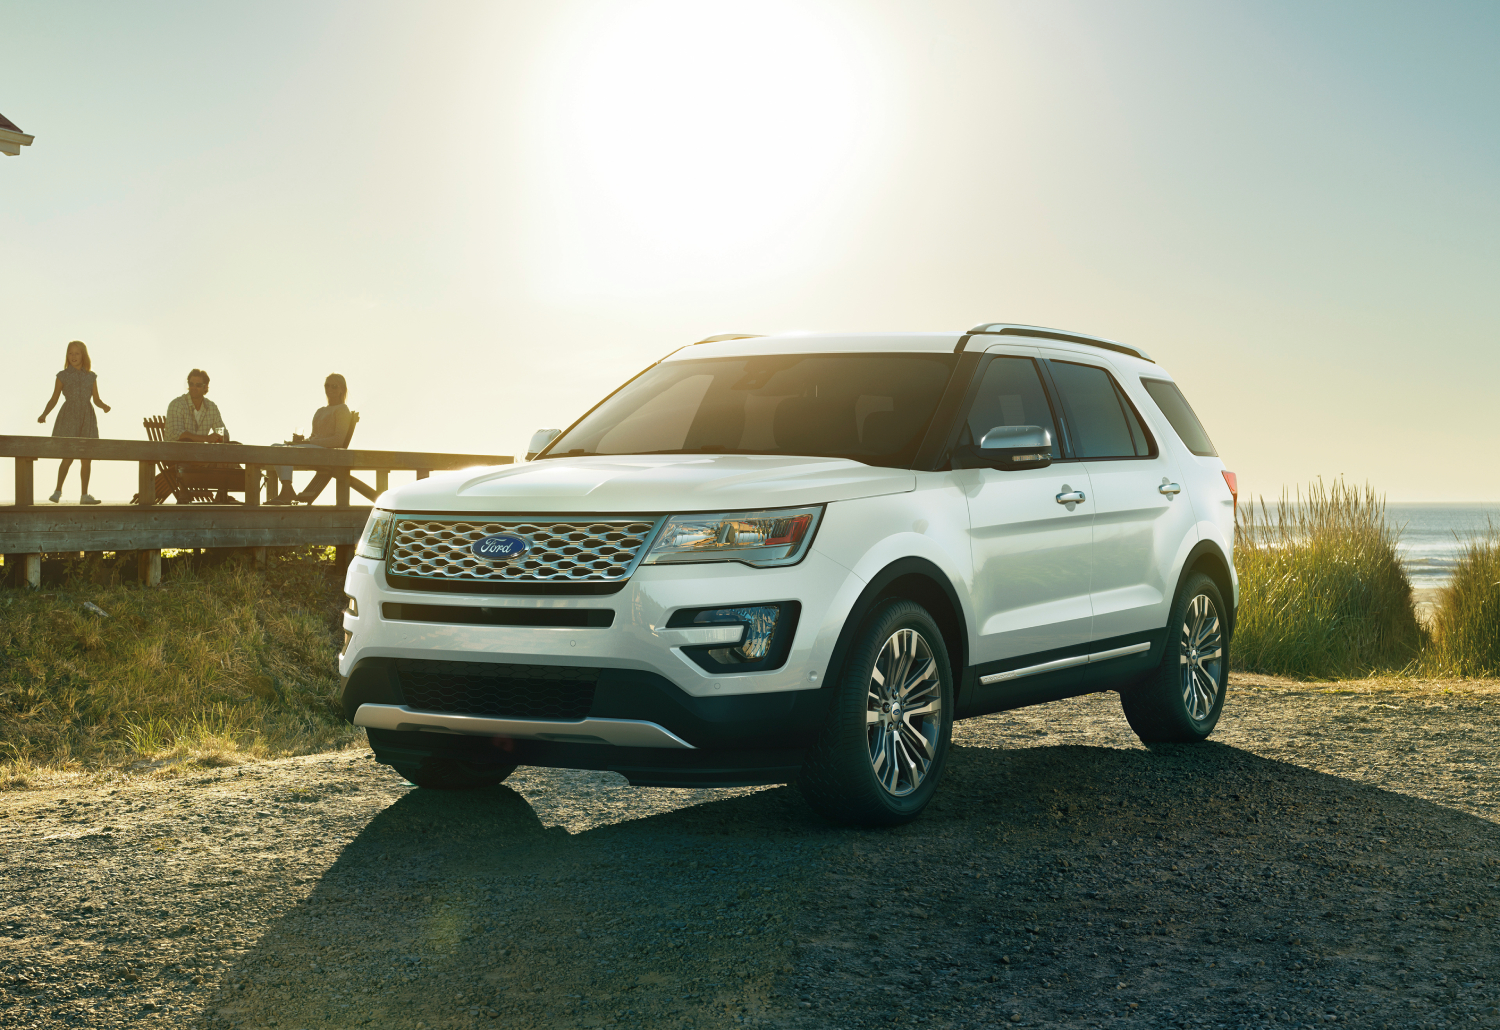 The best used Ford Explorer SUV years like this one in white